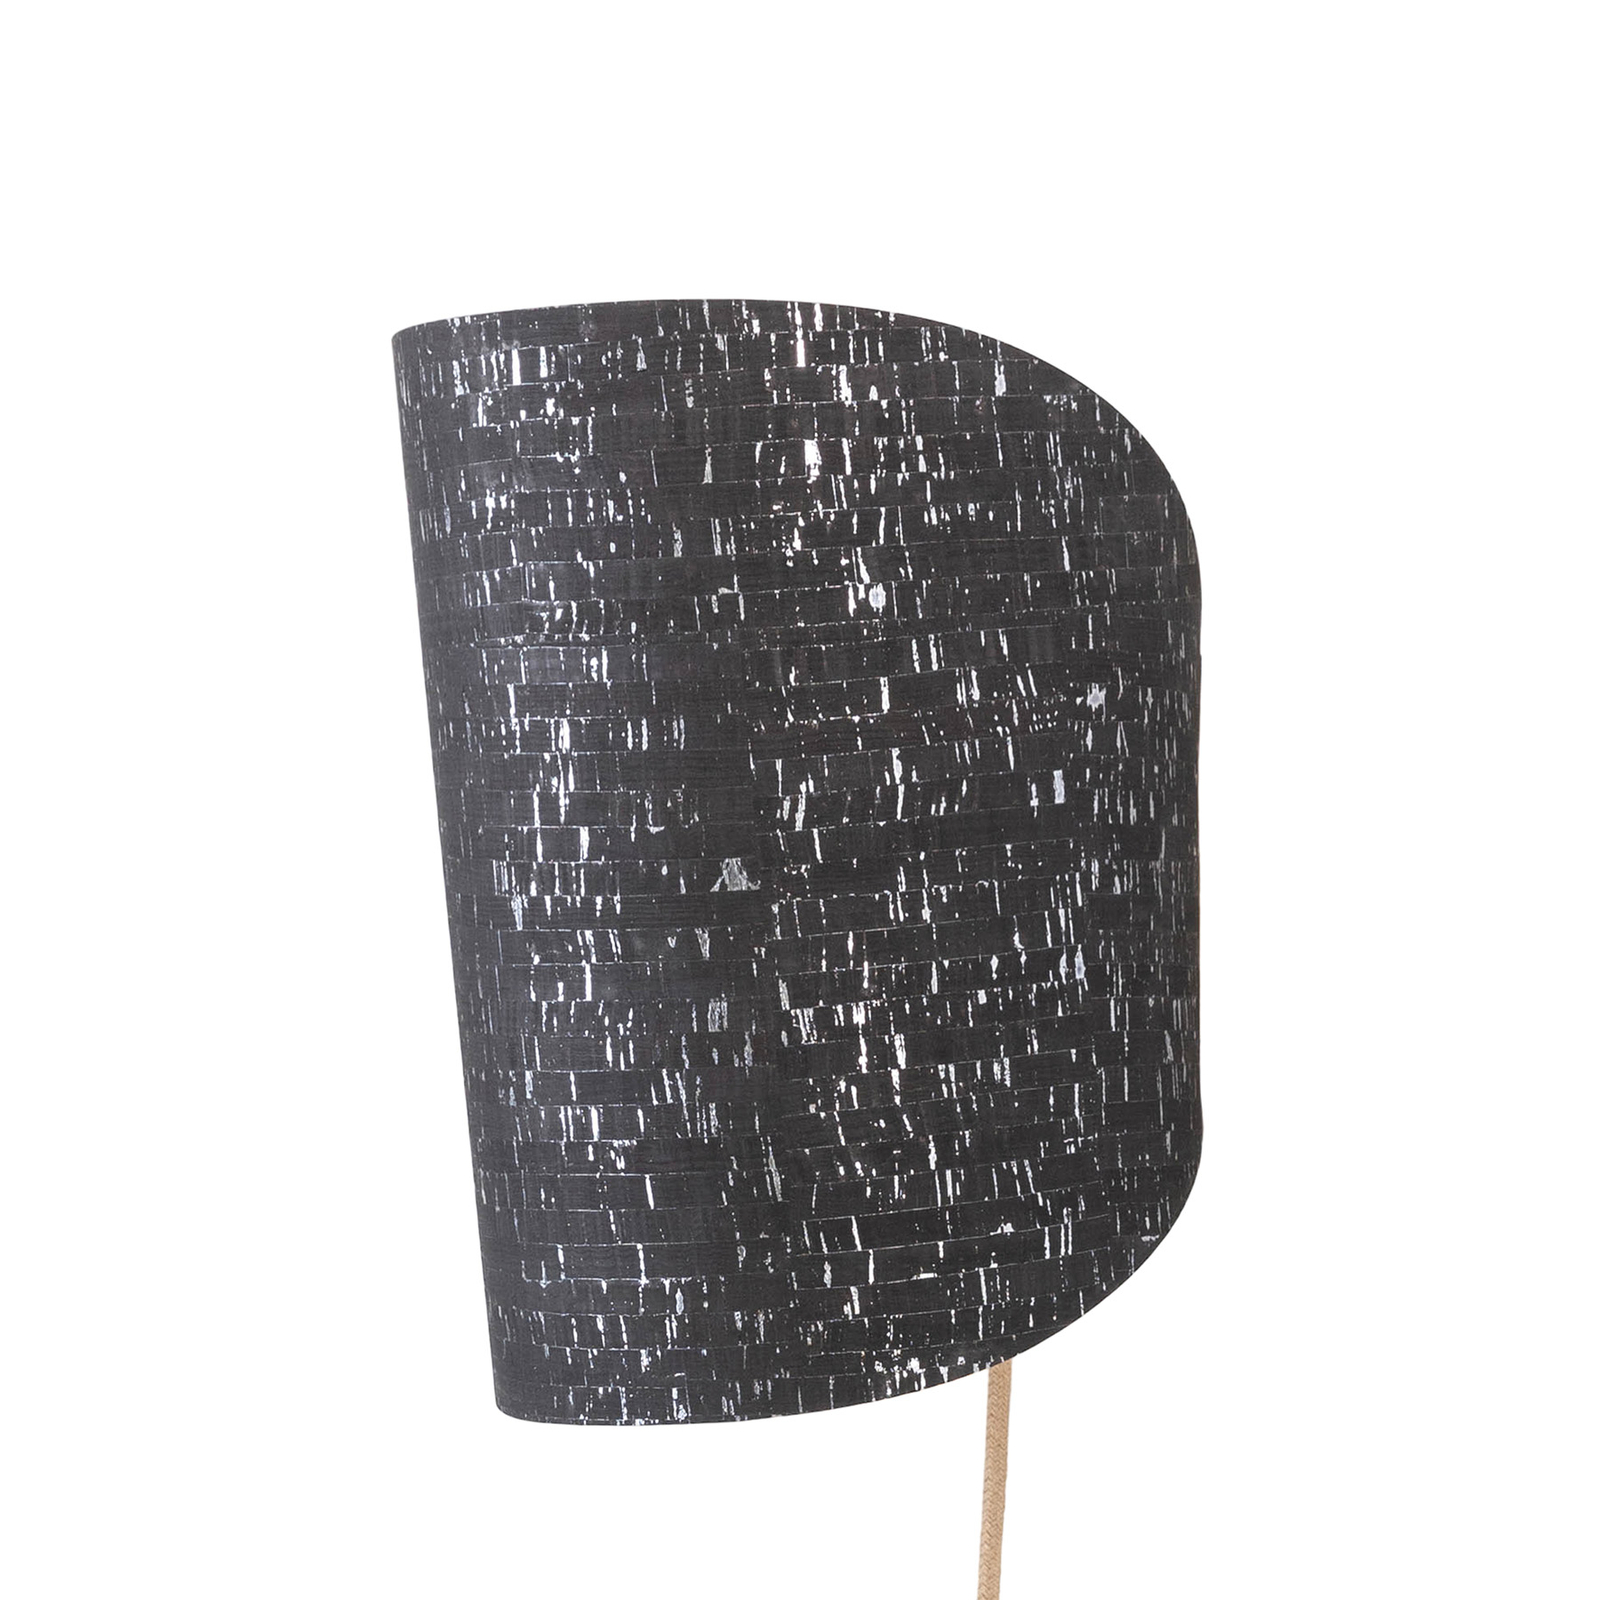 ALMUT 1411 wall lamp curved cork with a plug